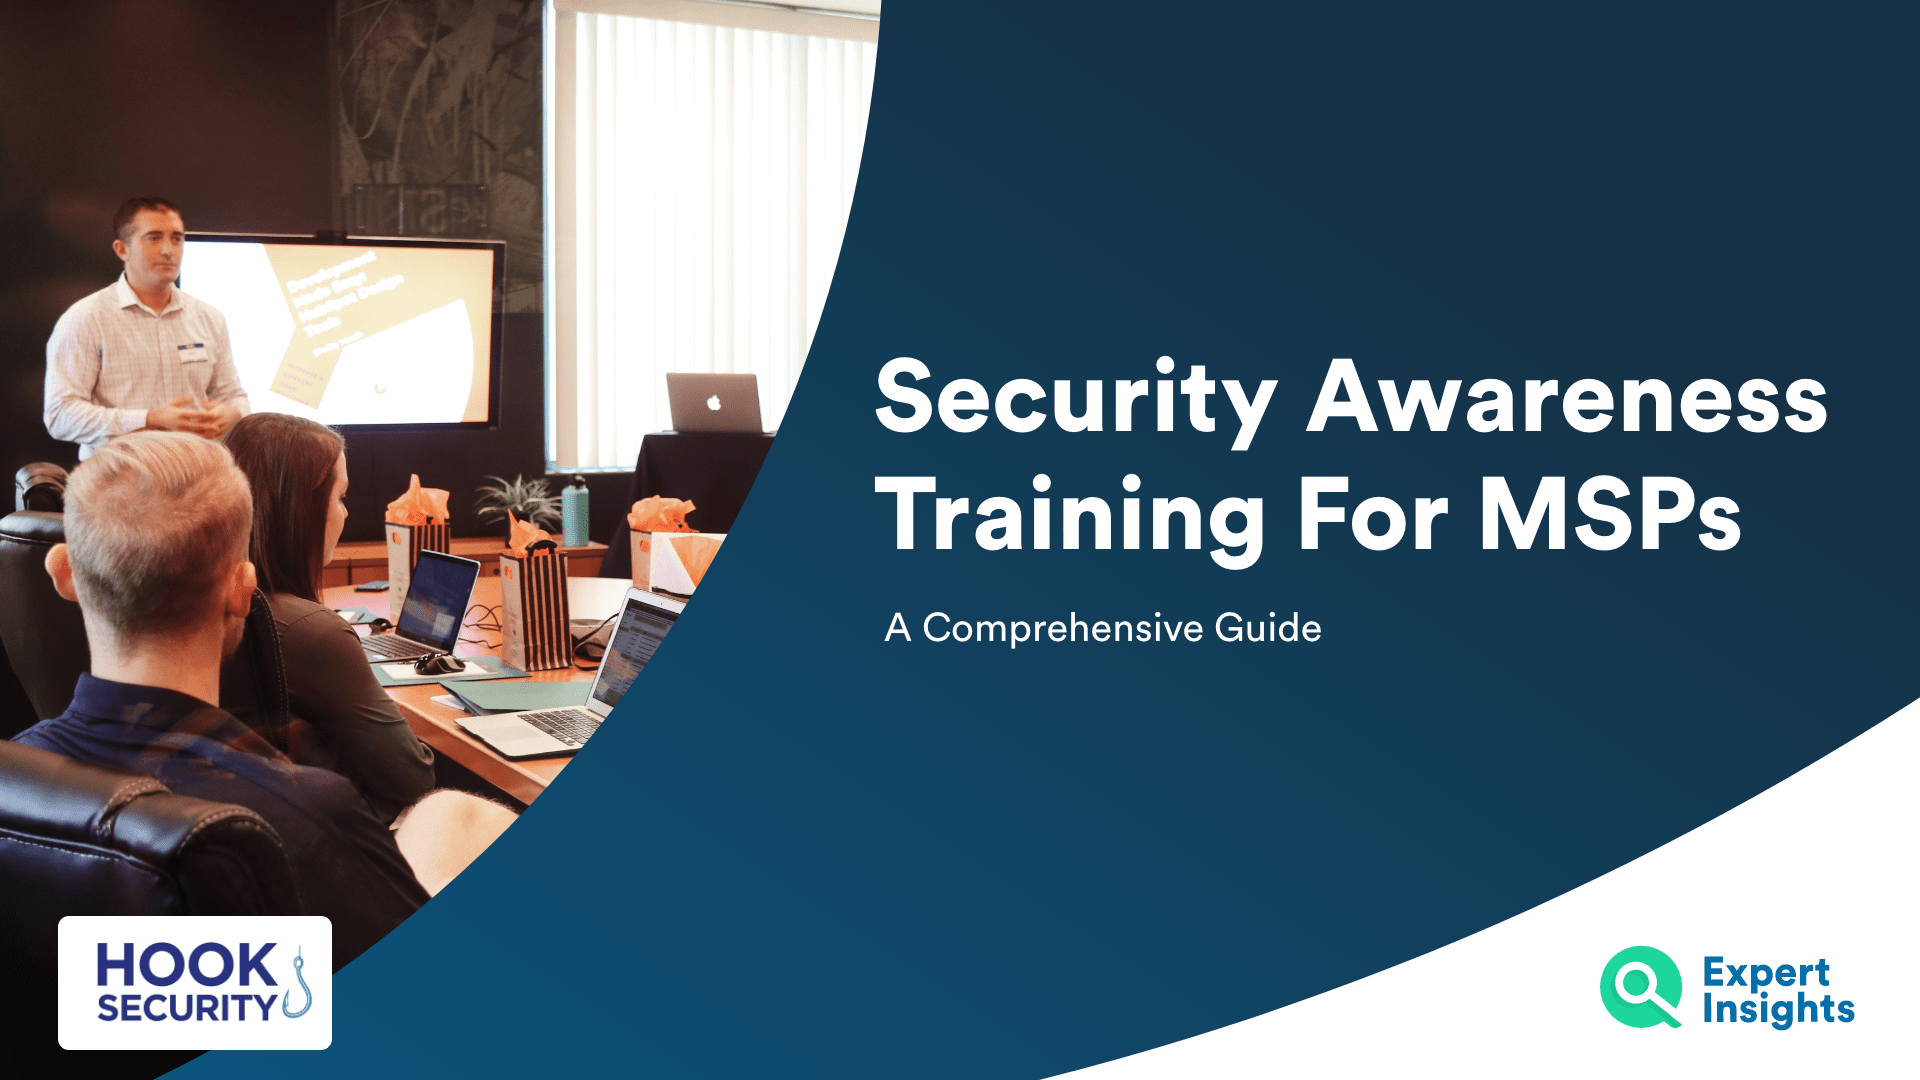 Security Awareness Training For MSPs: A Comprehensive Guide